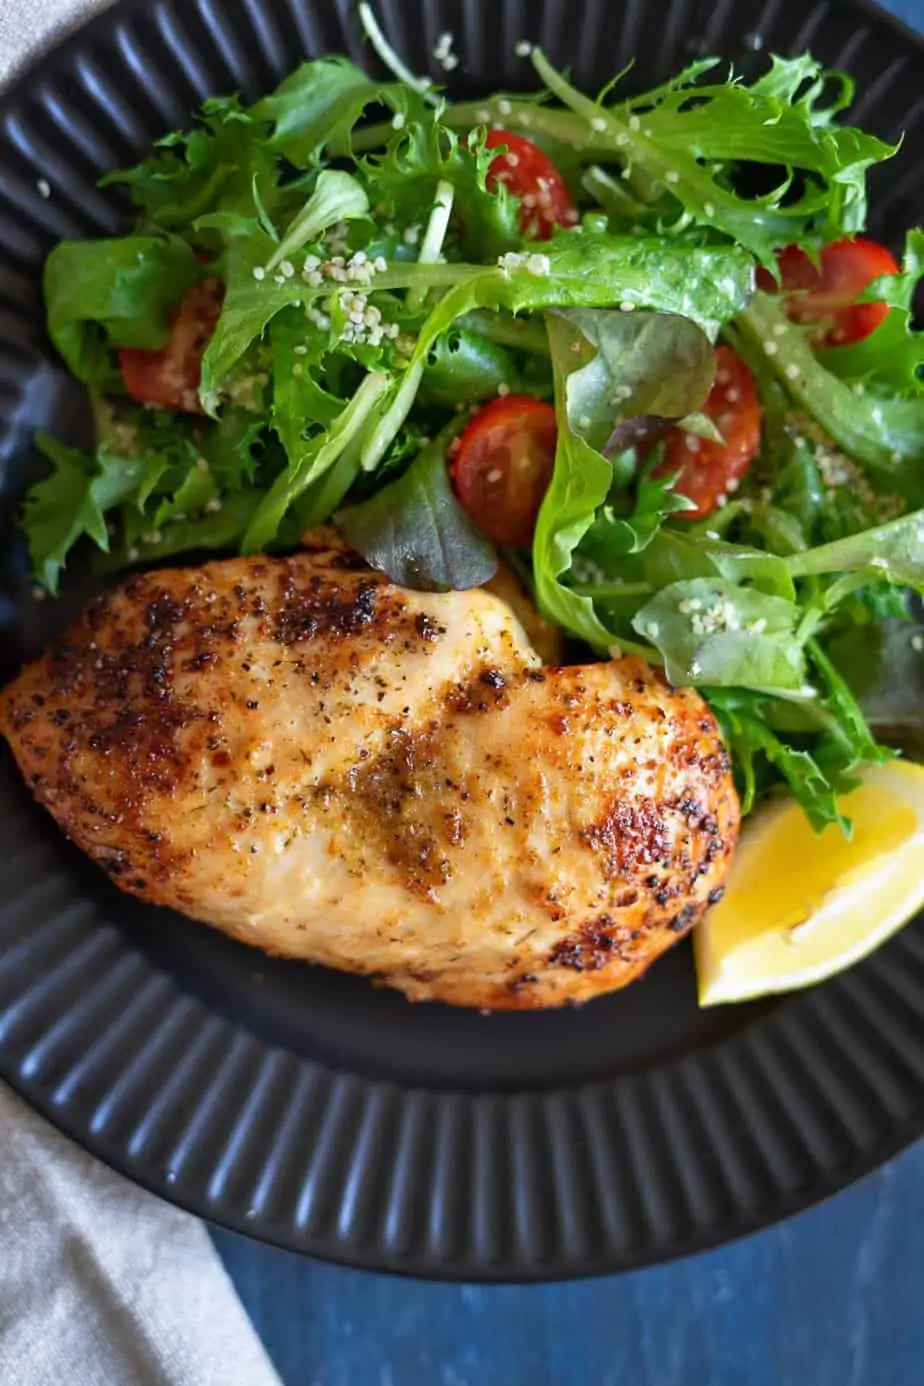 perfectly cooked frozen chicken breast served with a salad of baby lettuces mix and cherry tomatoes.